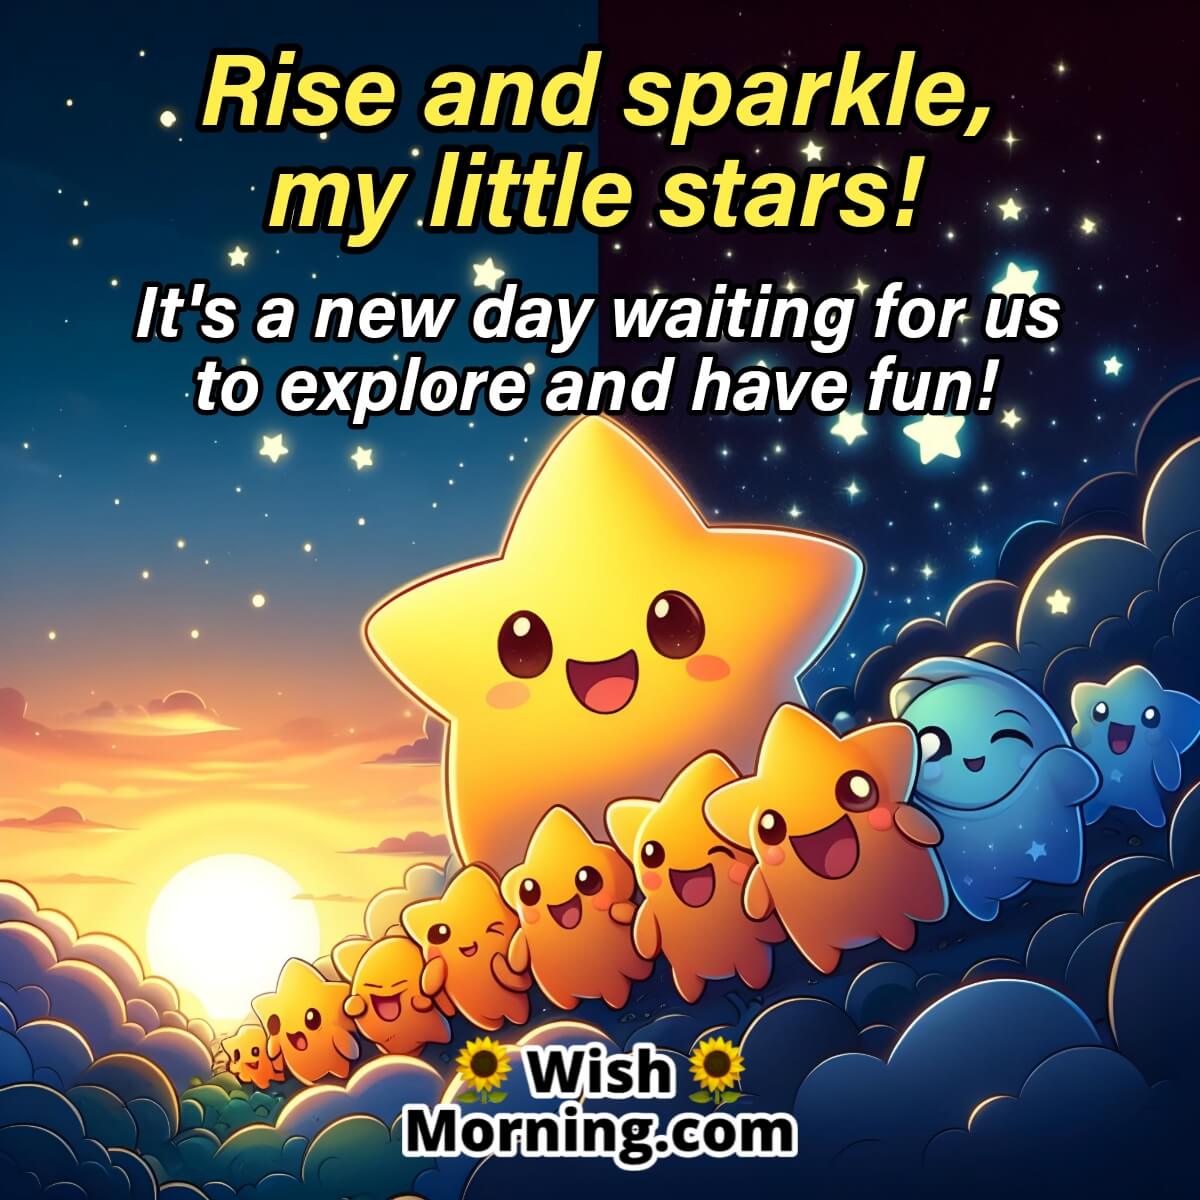 Rise And Sparkle, My Little Stars!